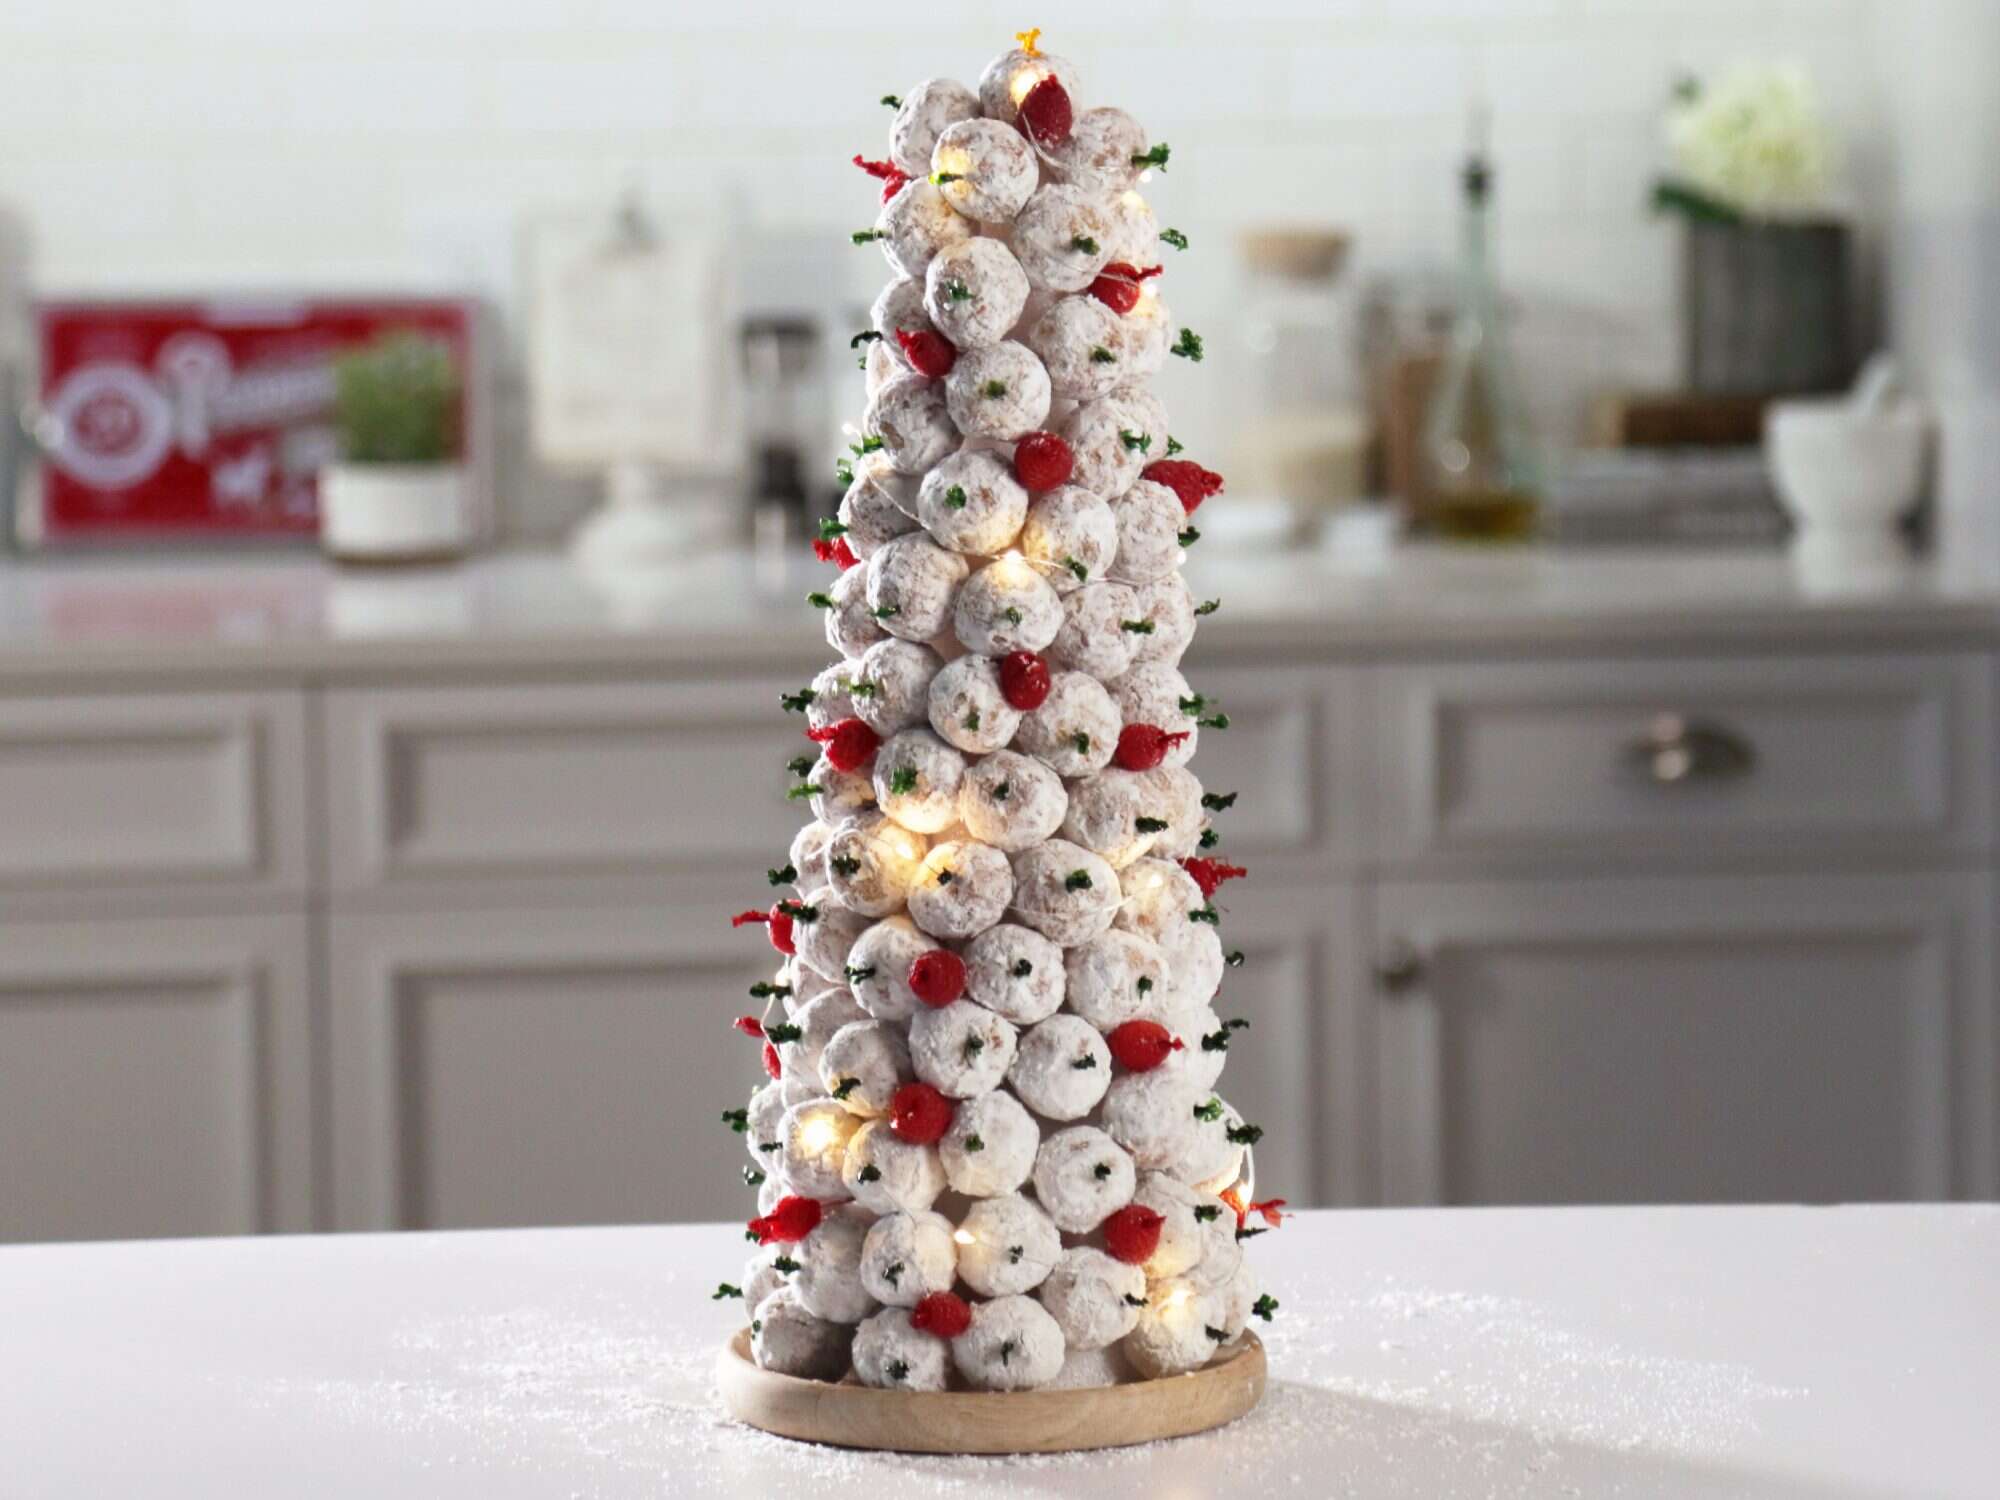 The Surprisingly Simple Donut Christmas Tree That's Beautiful and Delicious  